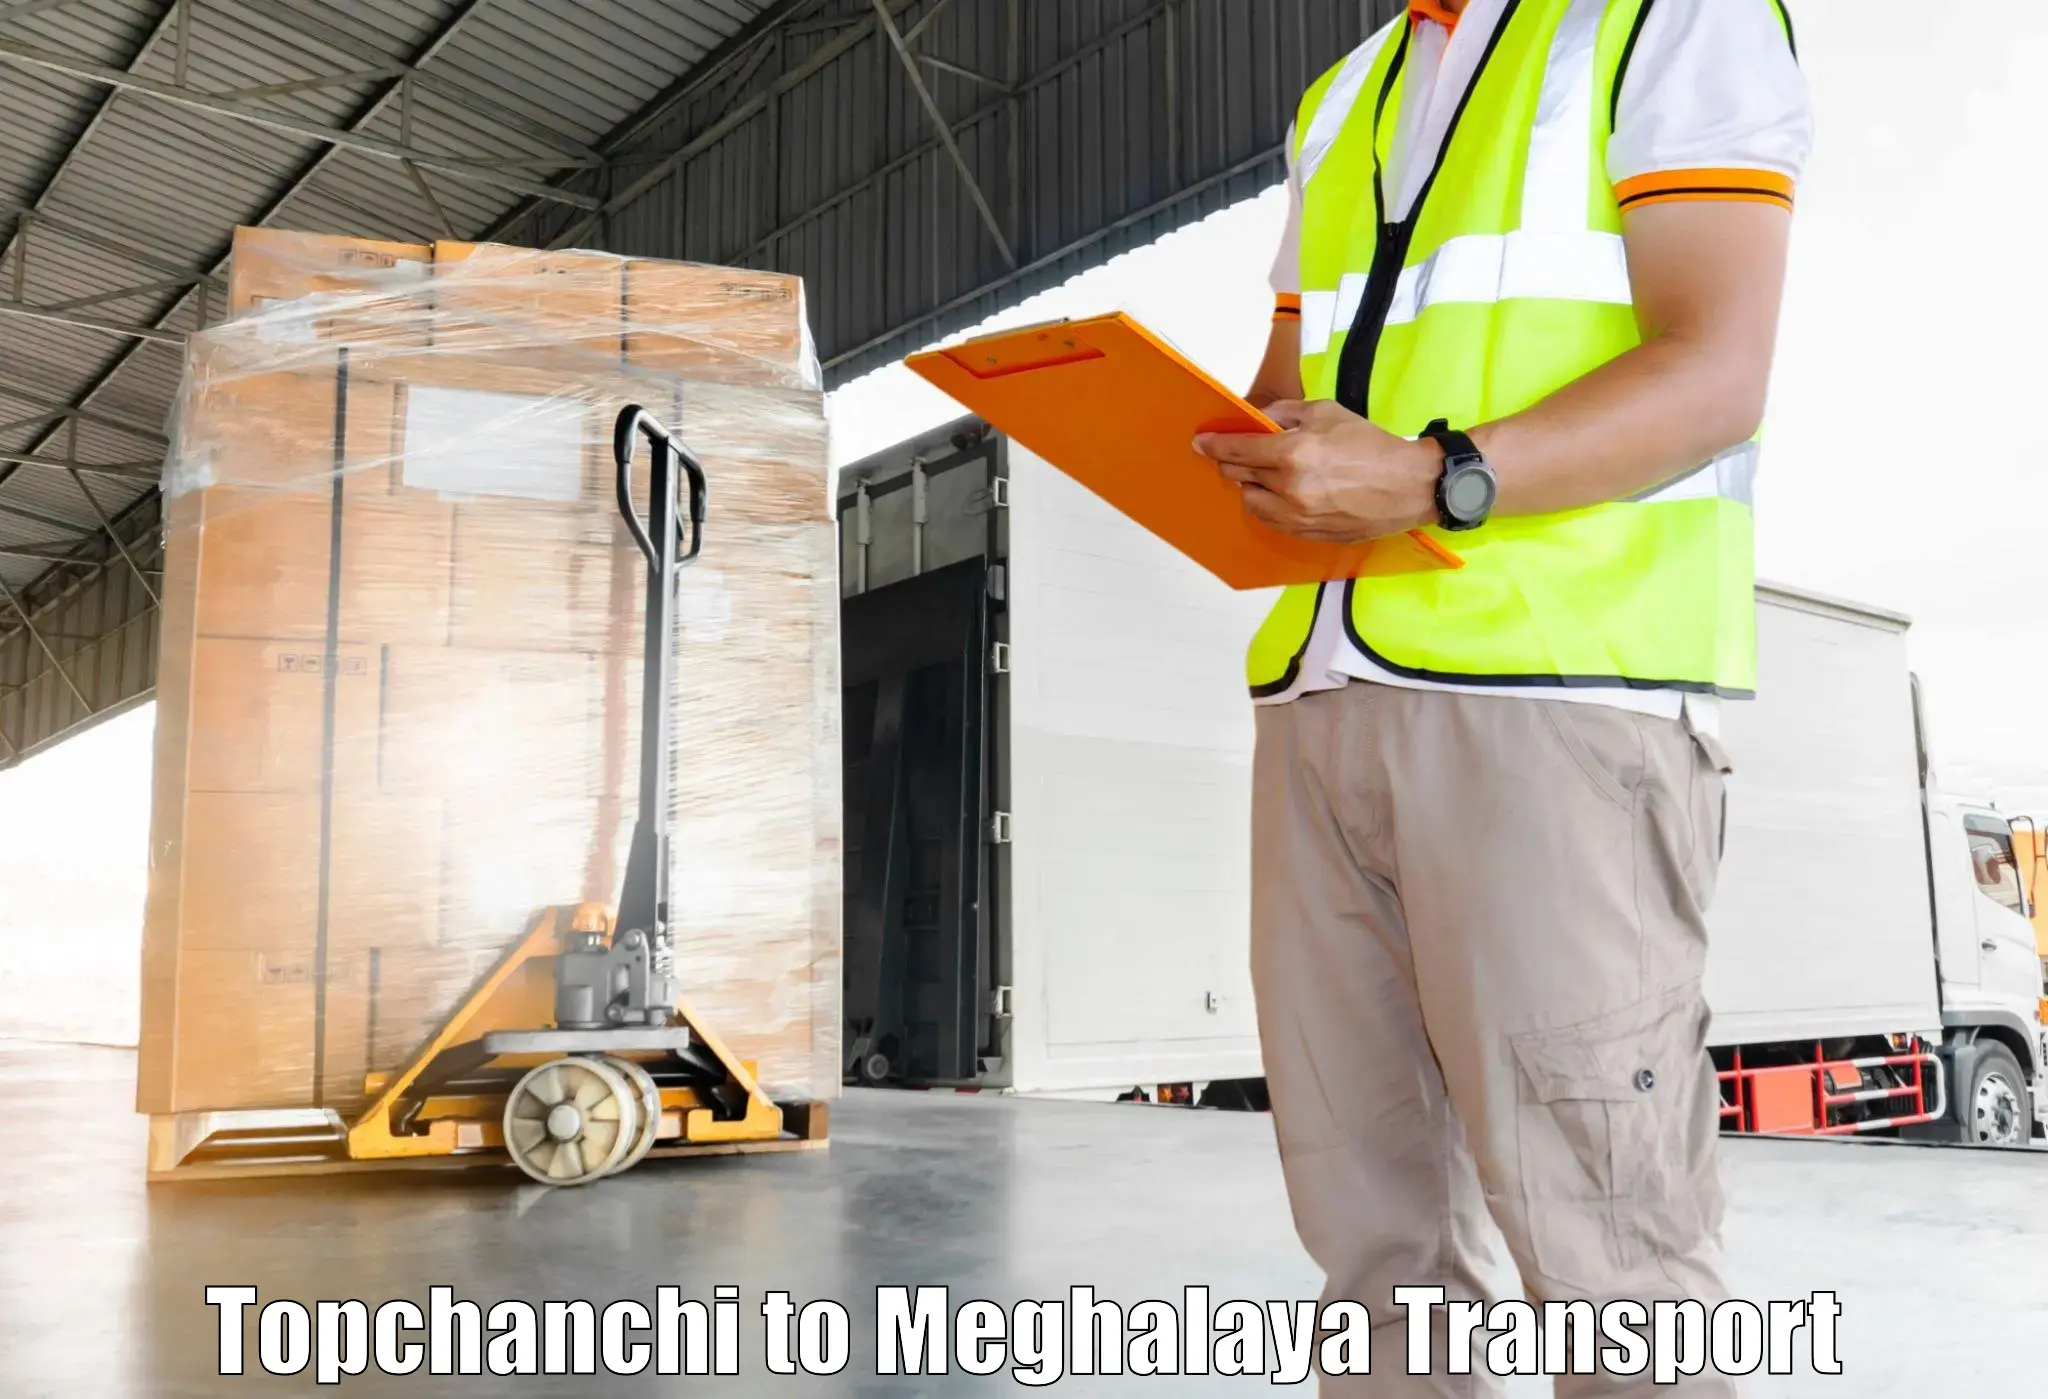 Container transport service Topchanchi to Meghalaya